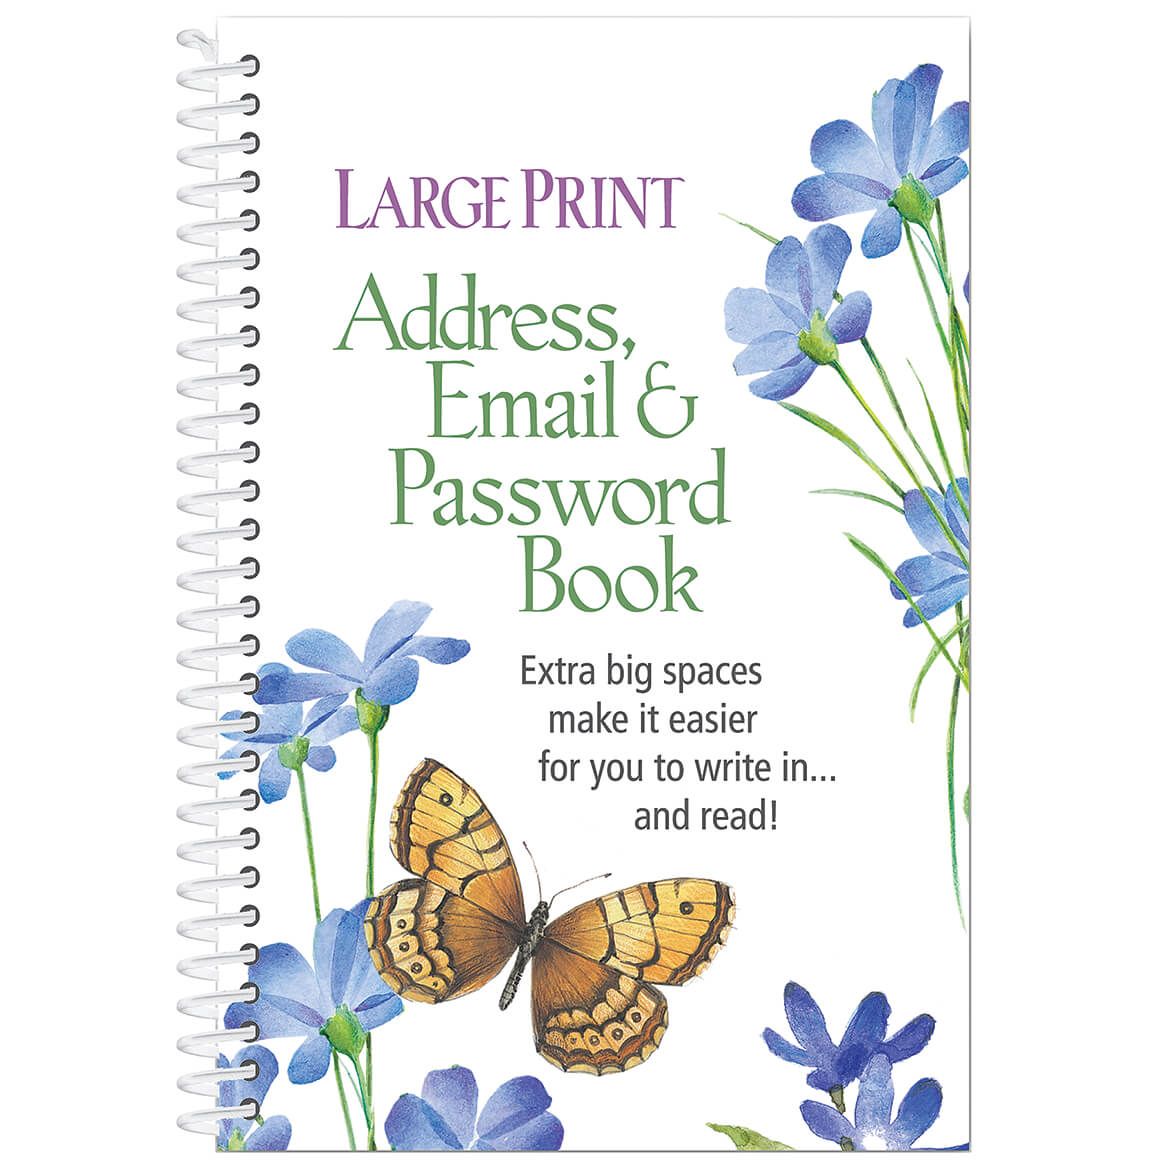 Large Print Address, Email & Password Book + '-' + 352395